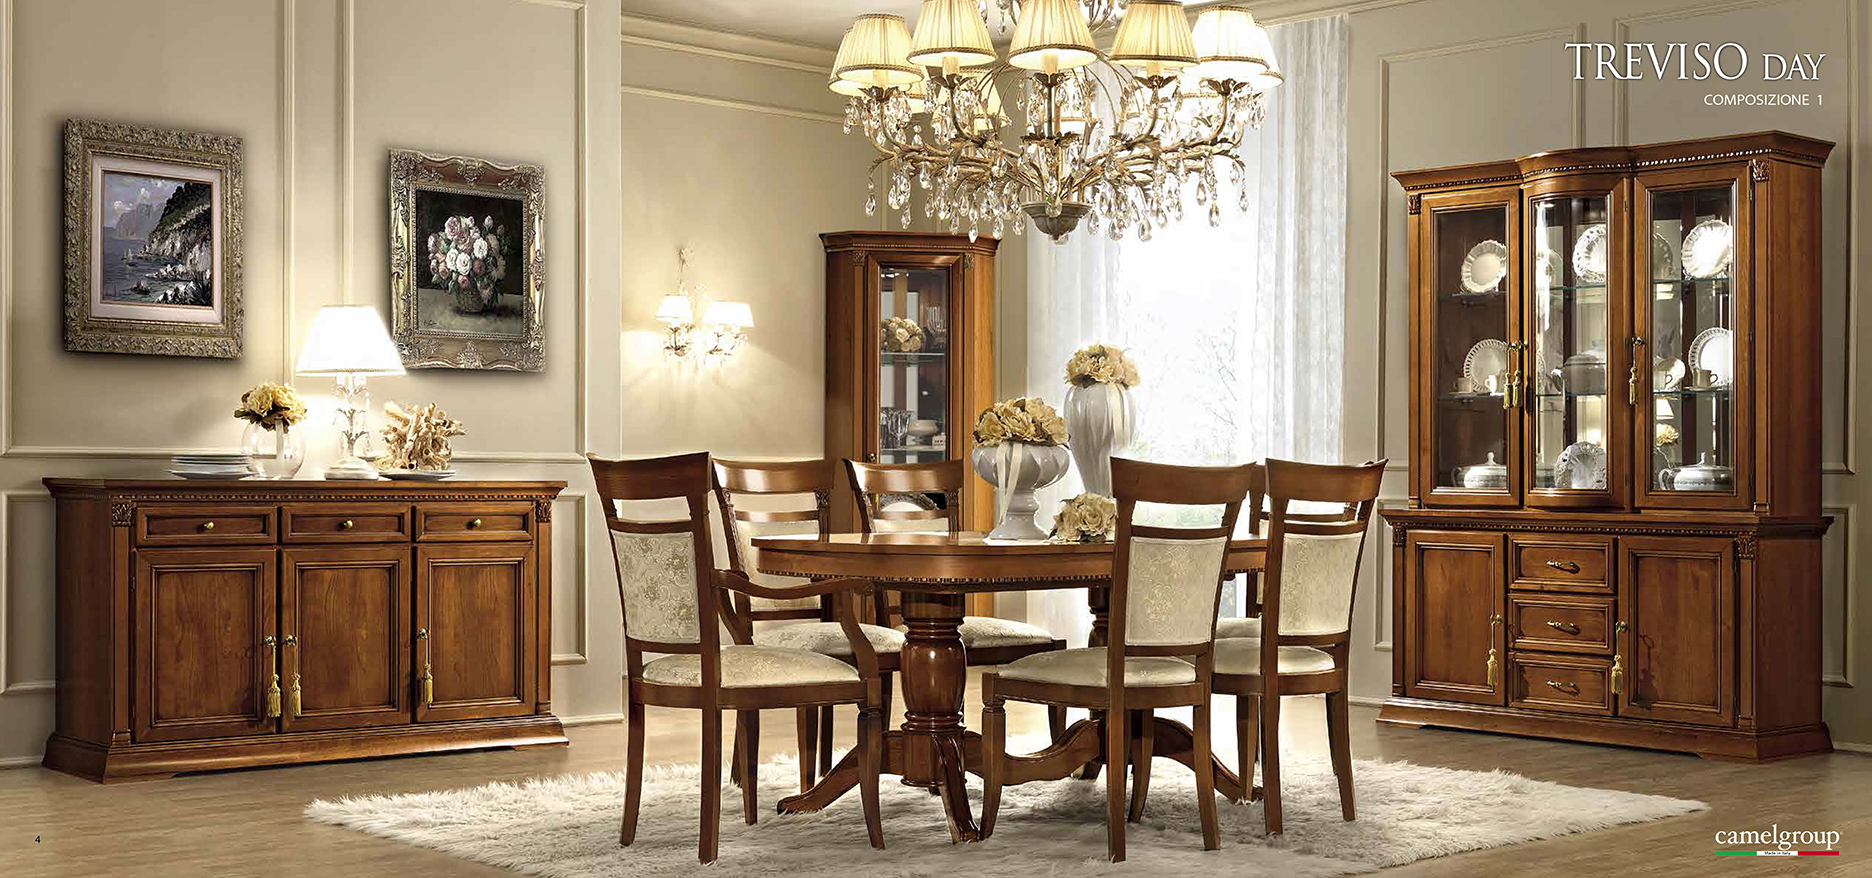 Dining Room Furniture China Cabinets and Buffets Treviso Cherry Day